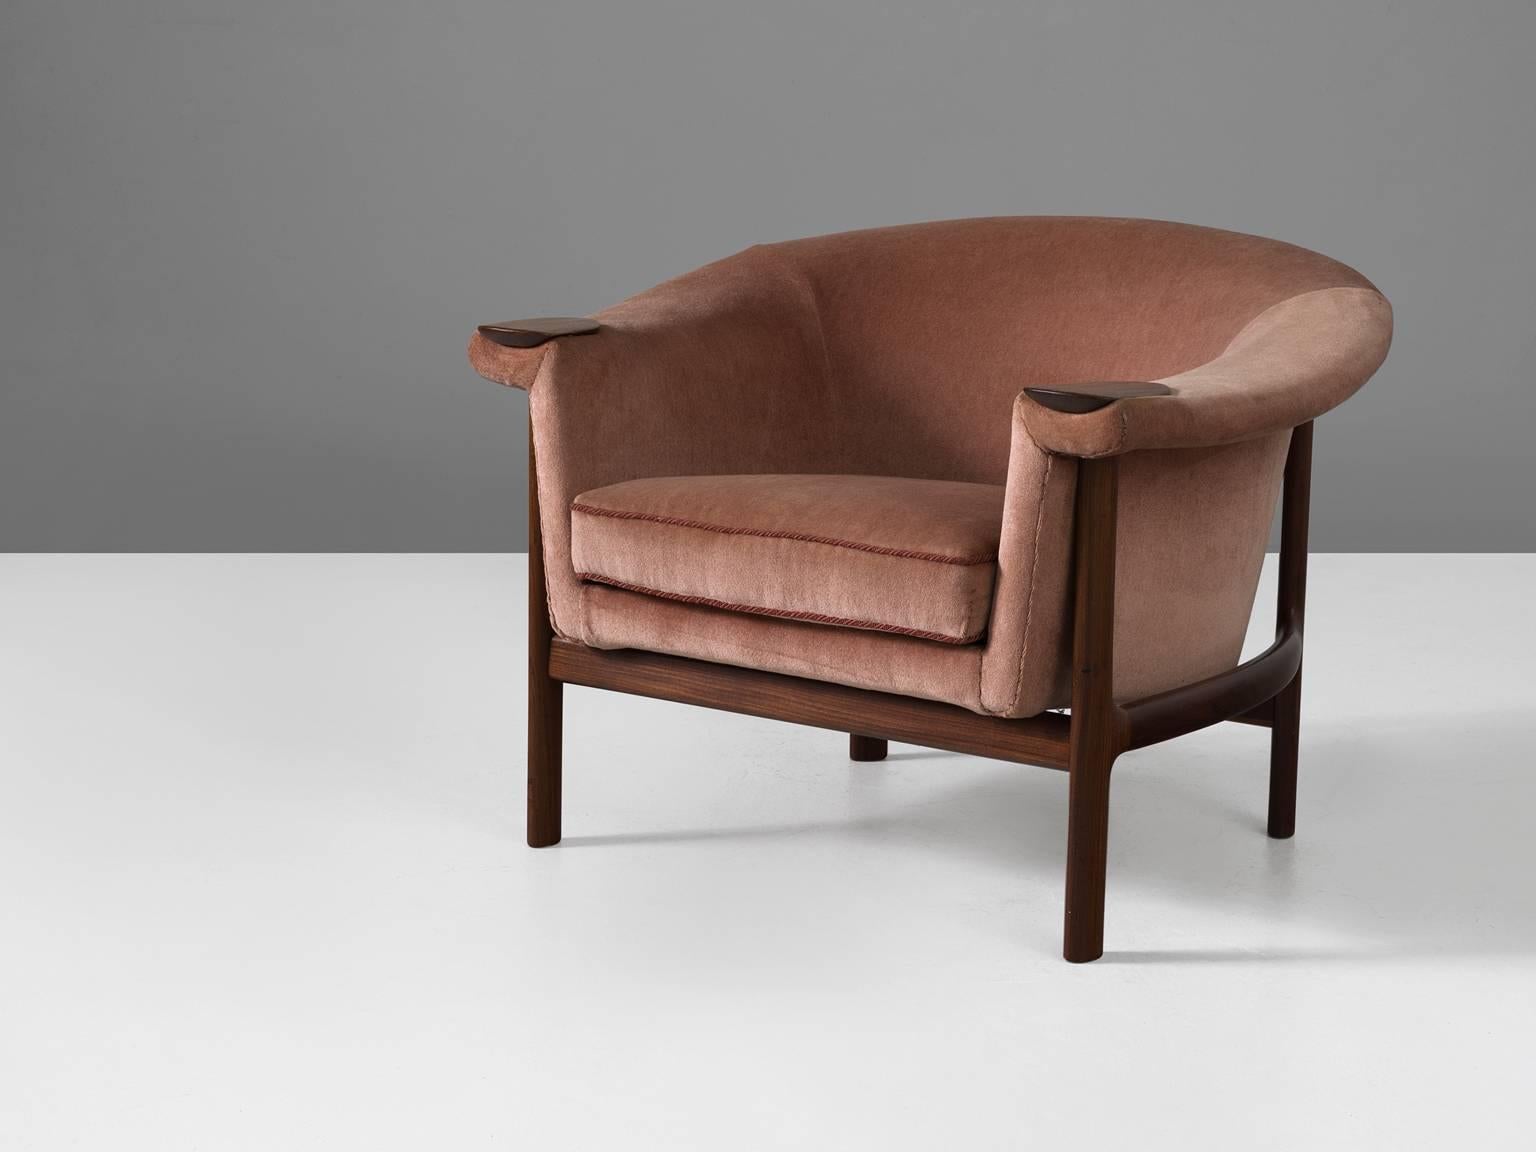 Lounge chair, in wood and fabric by Johannes Andersen, Denmark, 1950s.

Easy chair with a frame of wood and rose mohair-velours upholstery. By the round shapes and soft pink upholstery this chair gets a very soft and appealing expression. The wooden